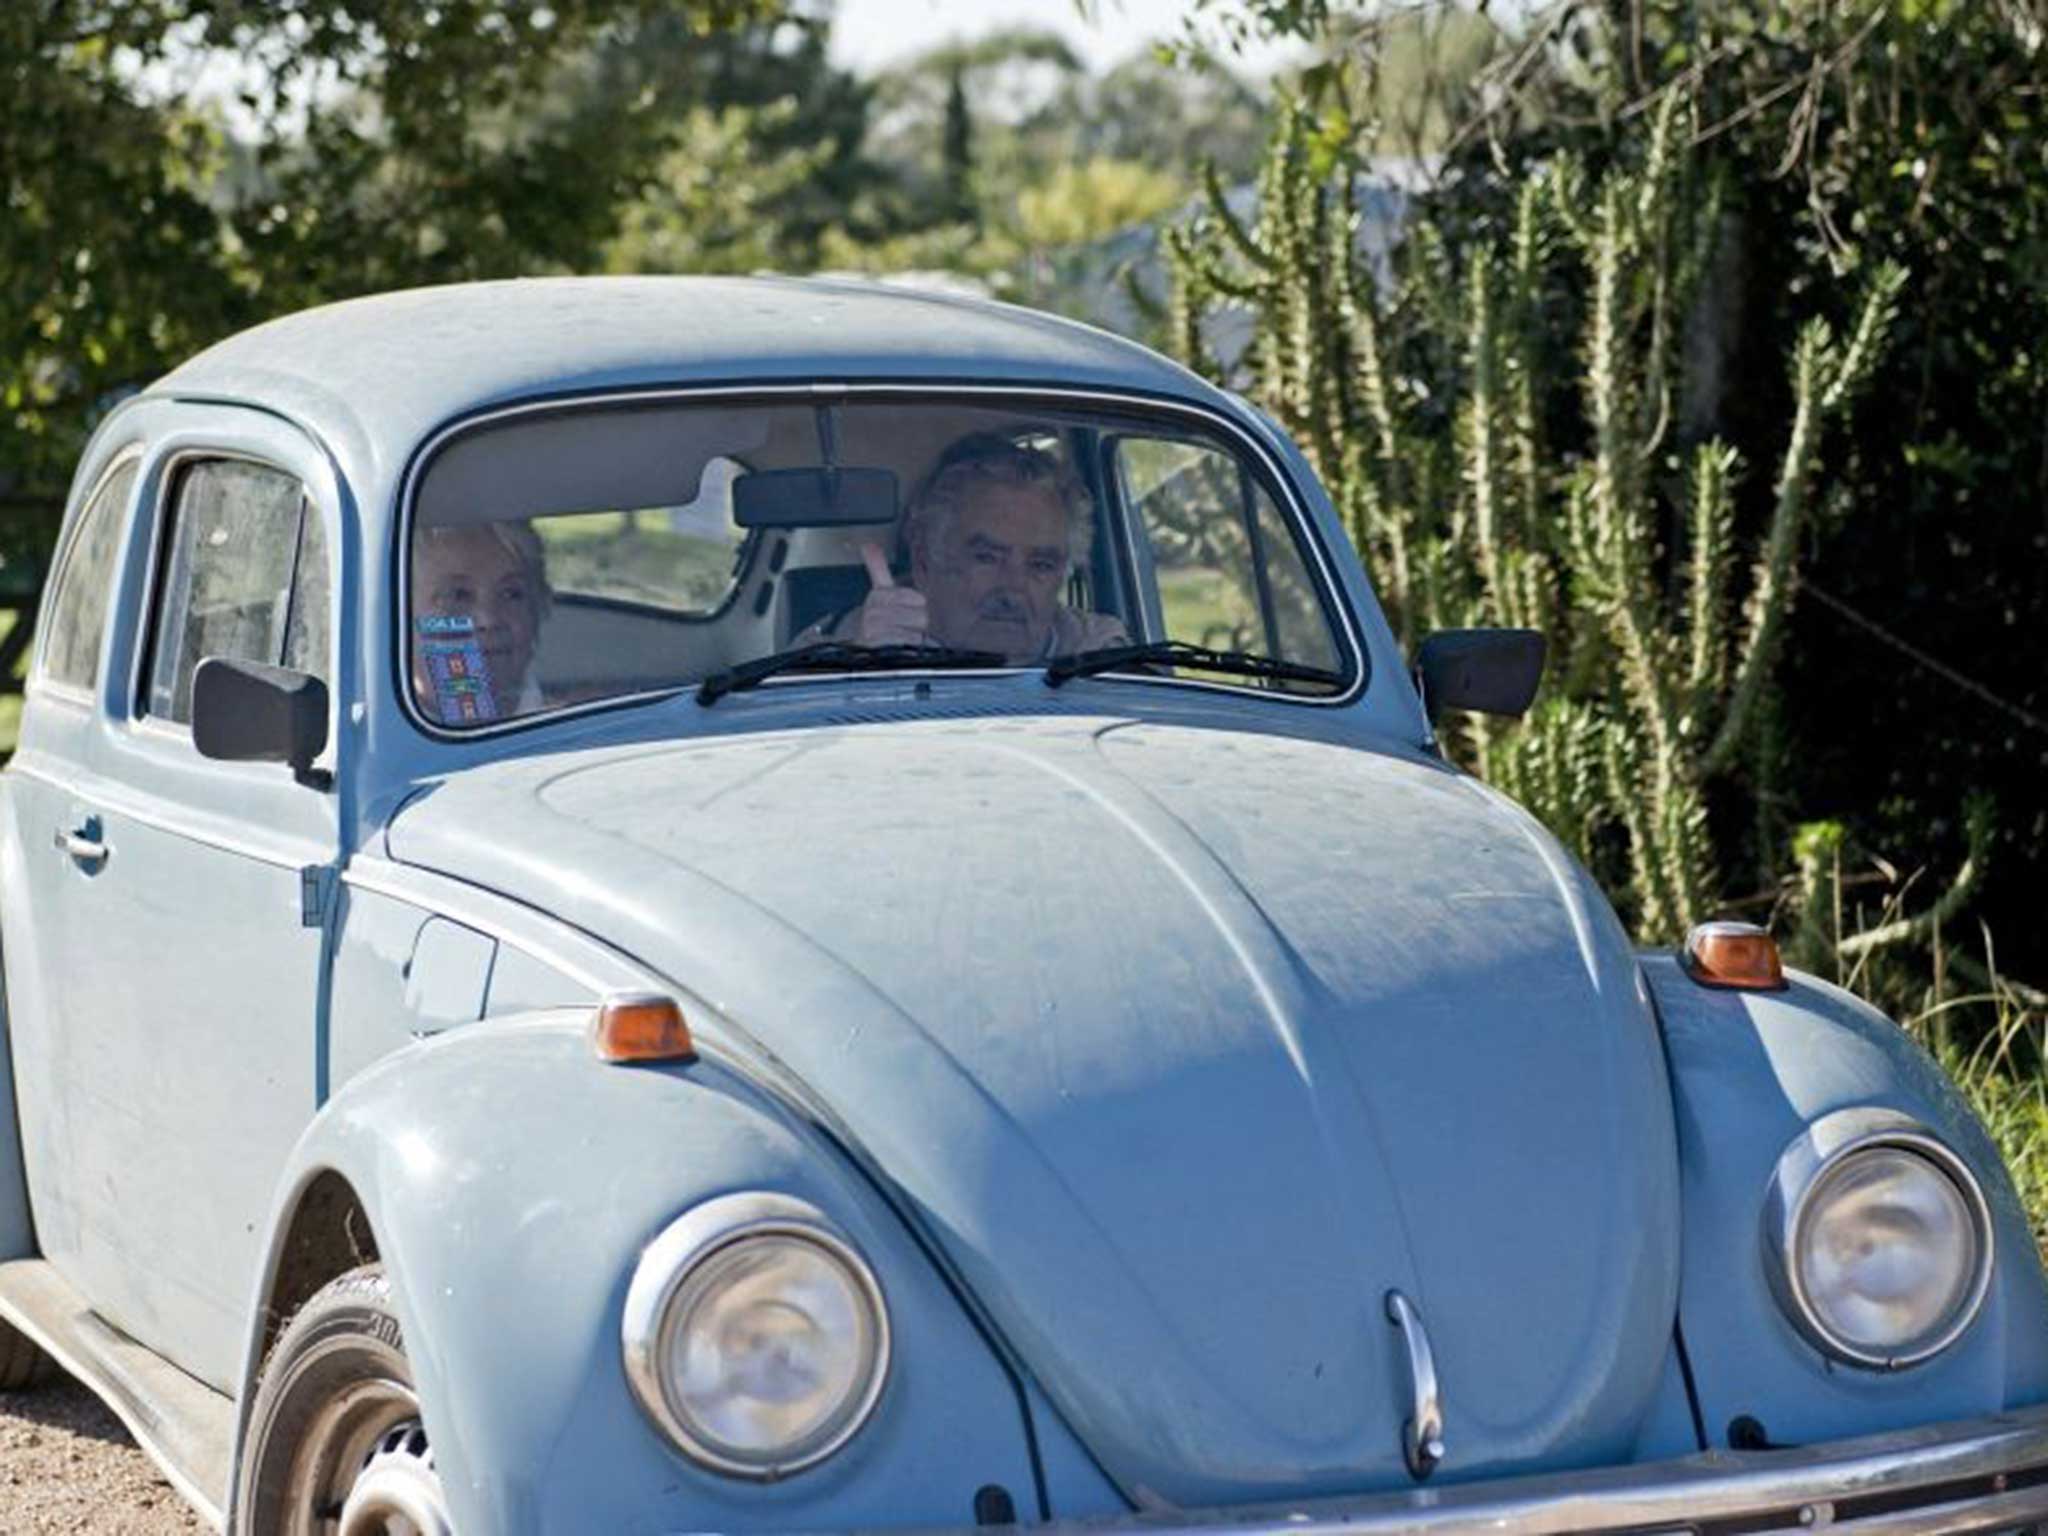 President Jose Mujica and his wife in the VW Beetle